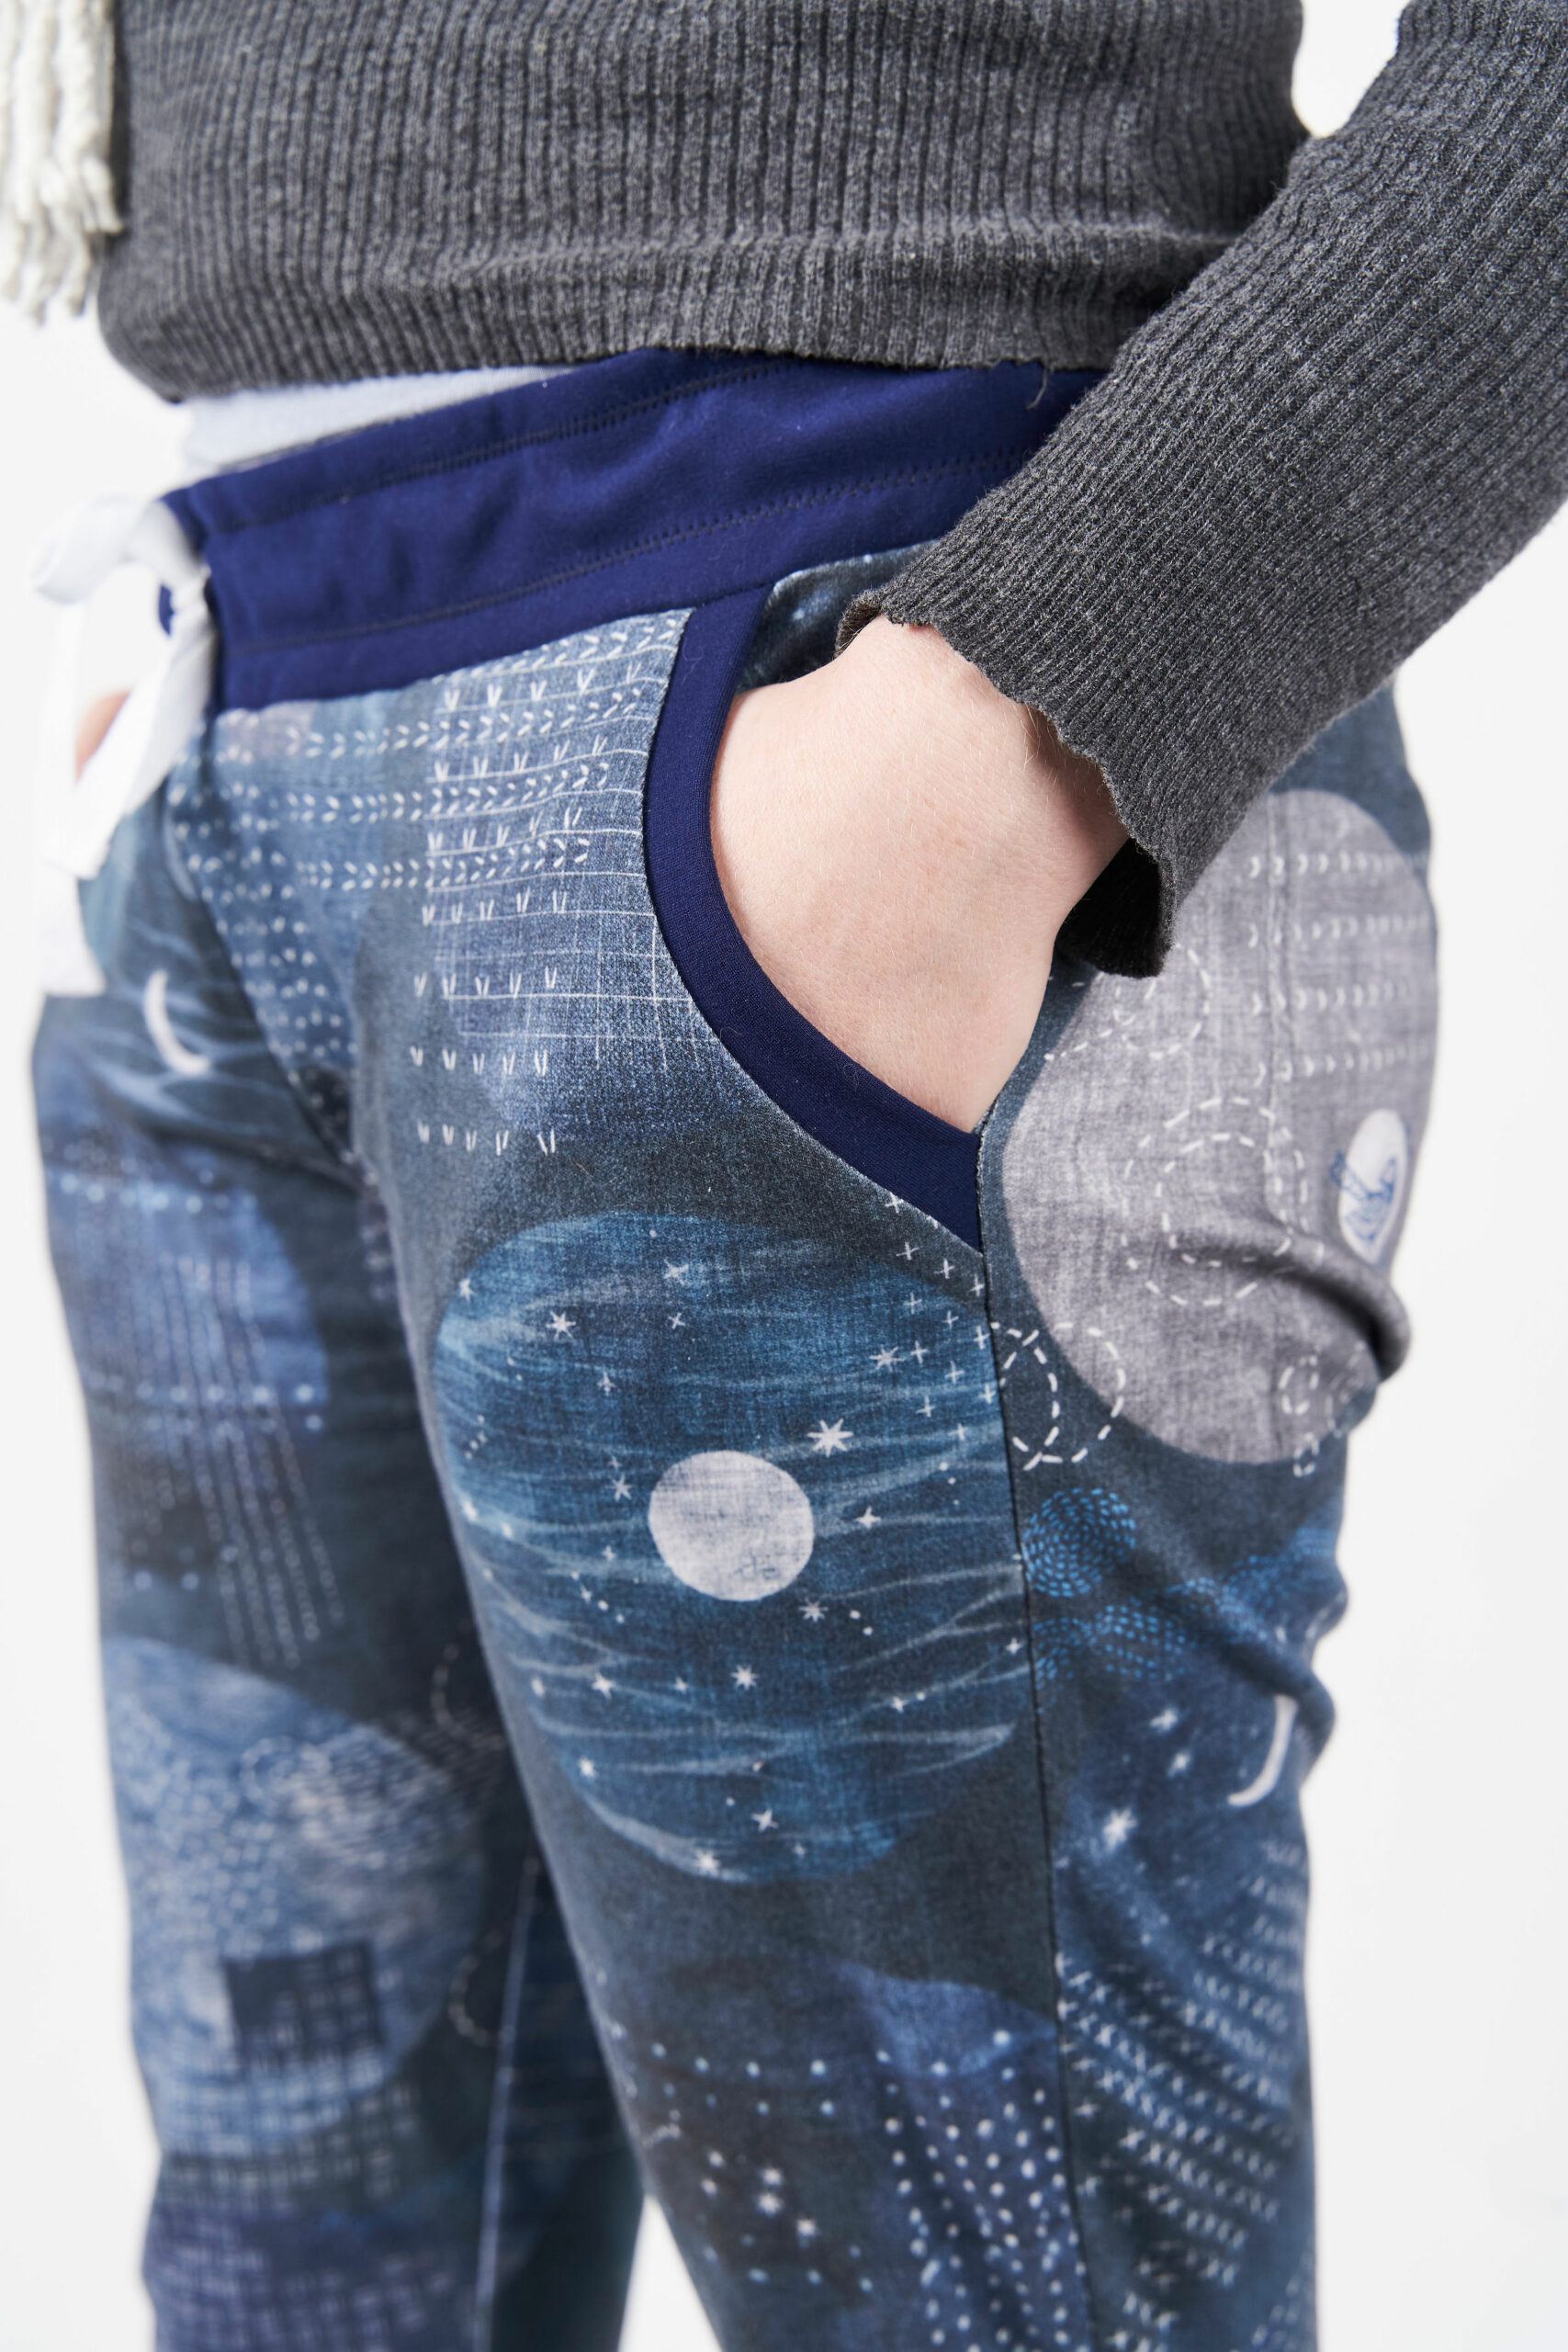 Livian wearing their blue joggers with moon images